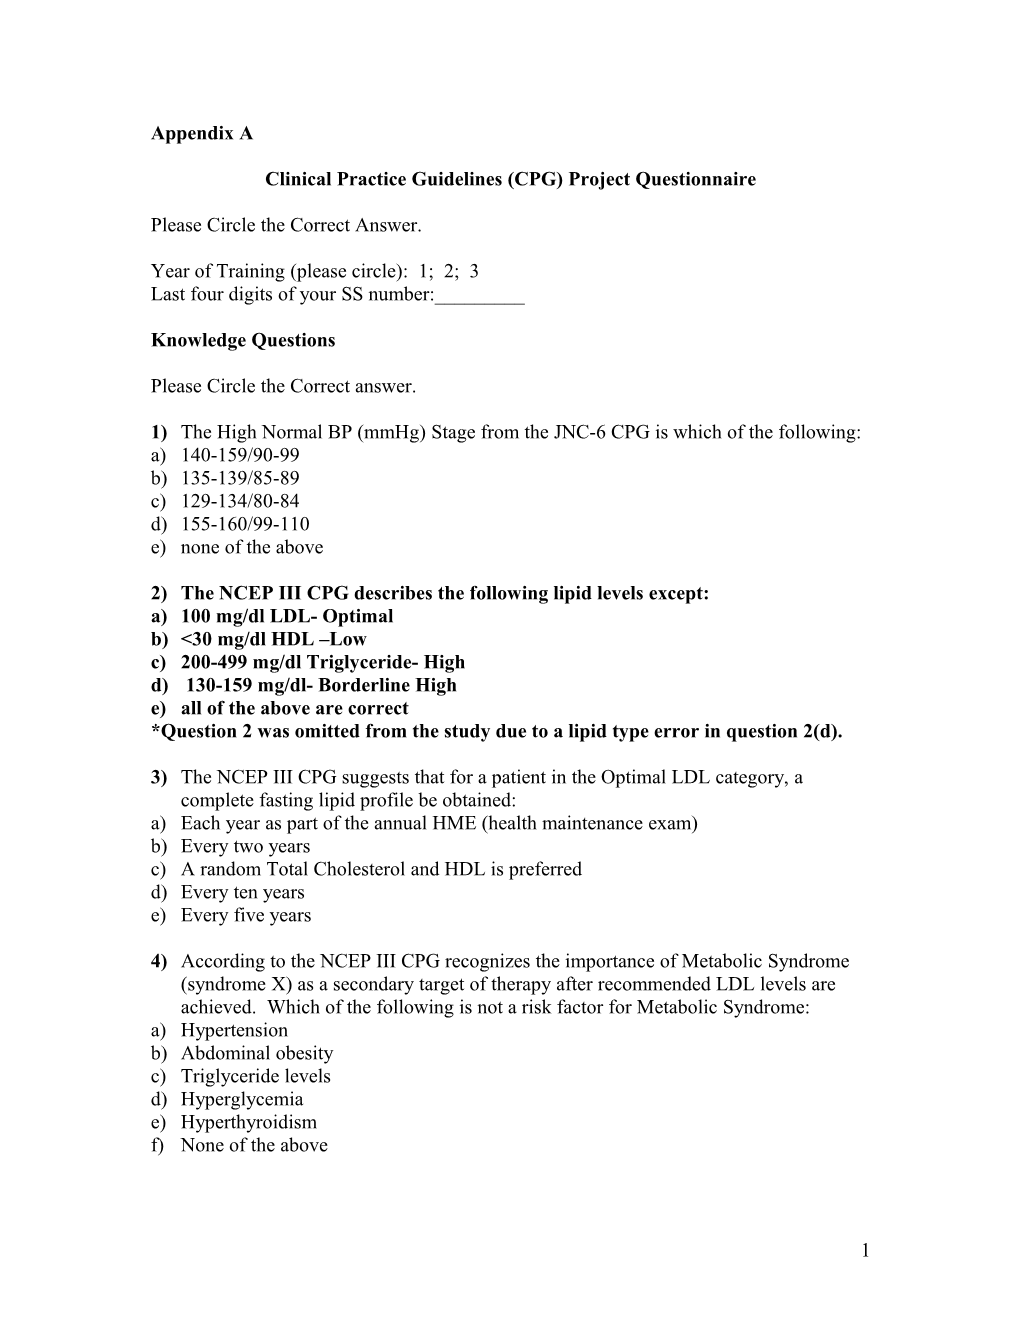 Clinical Practice Guidelines (CPG) Project Questionnaire